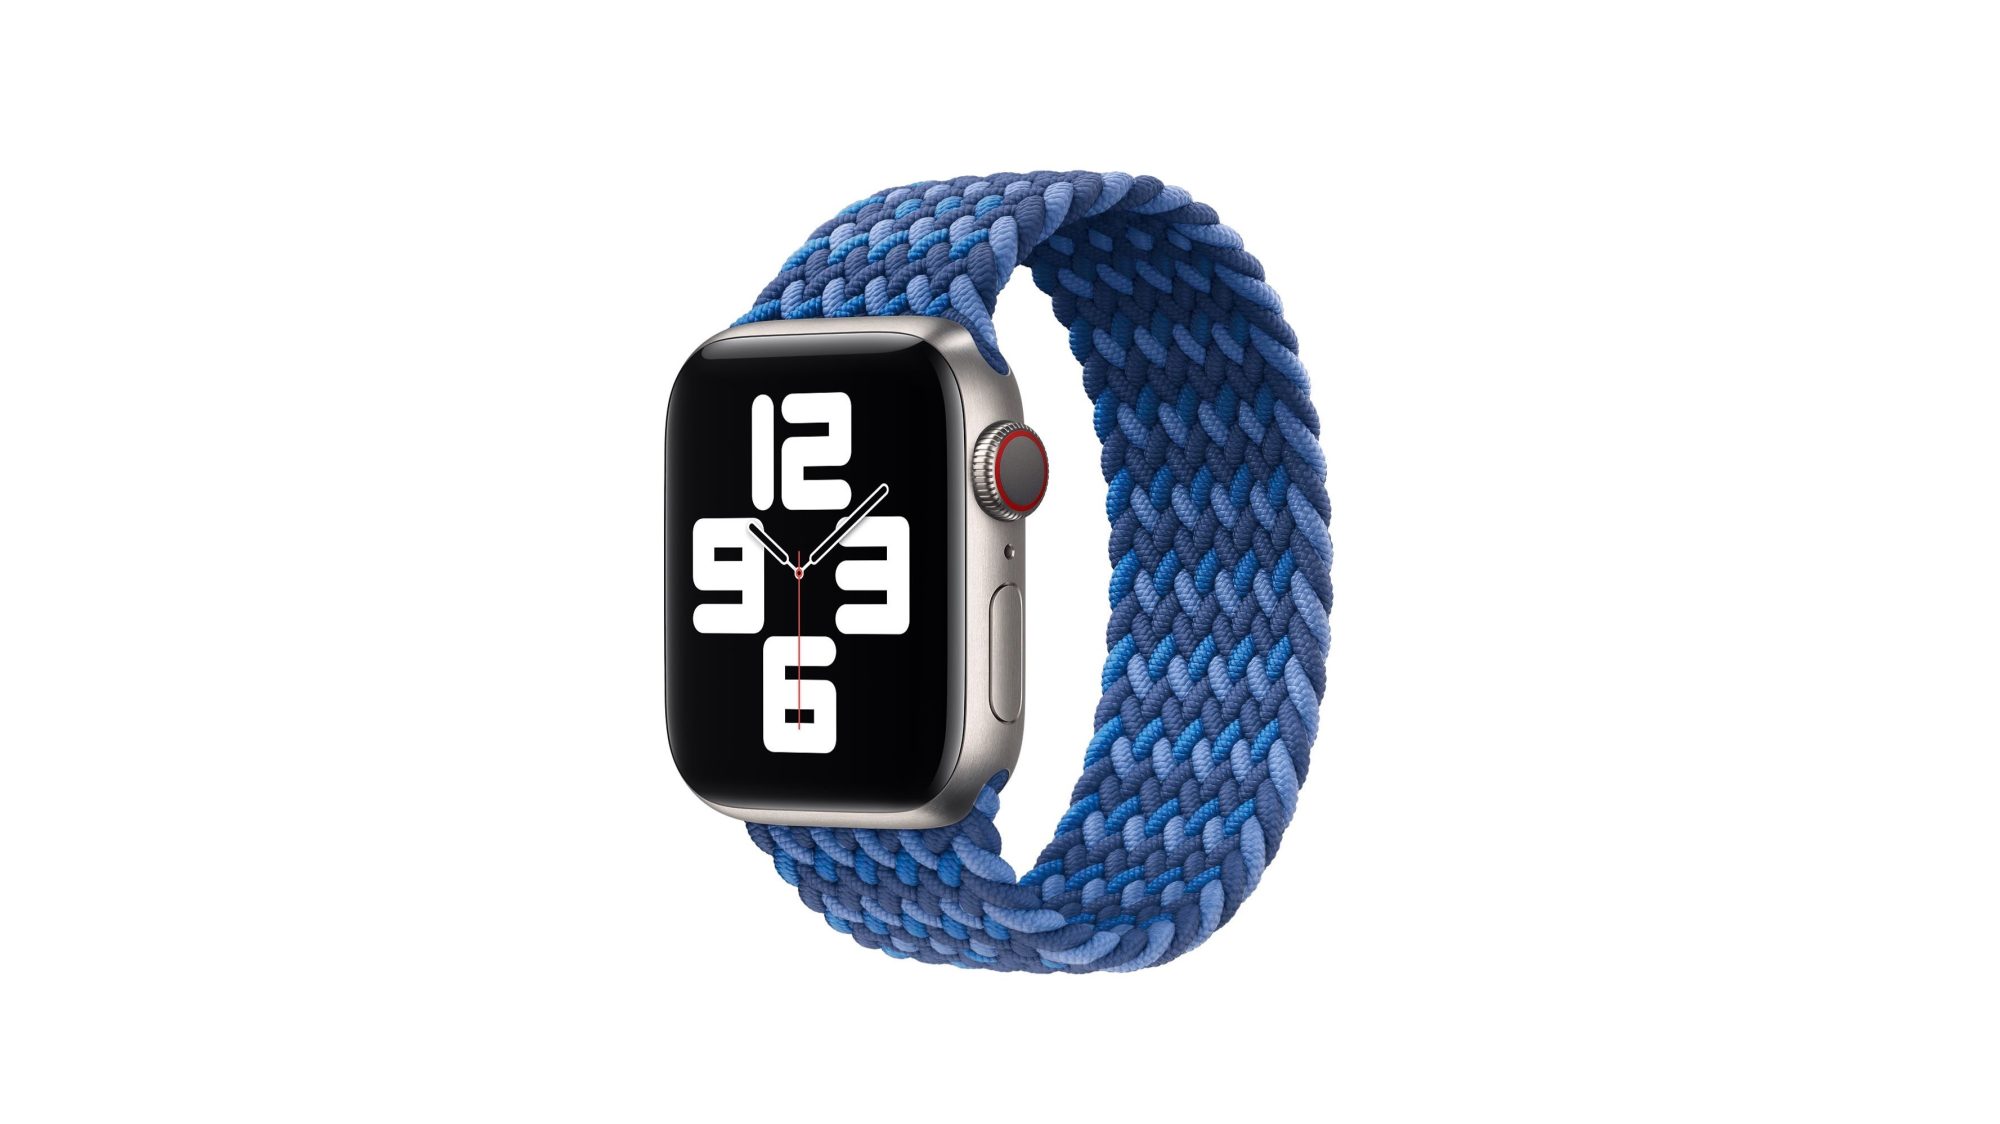 Braided Solo Loop bands for Apple Watch